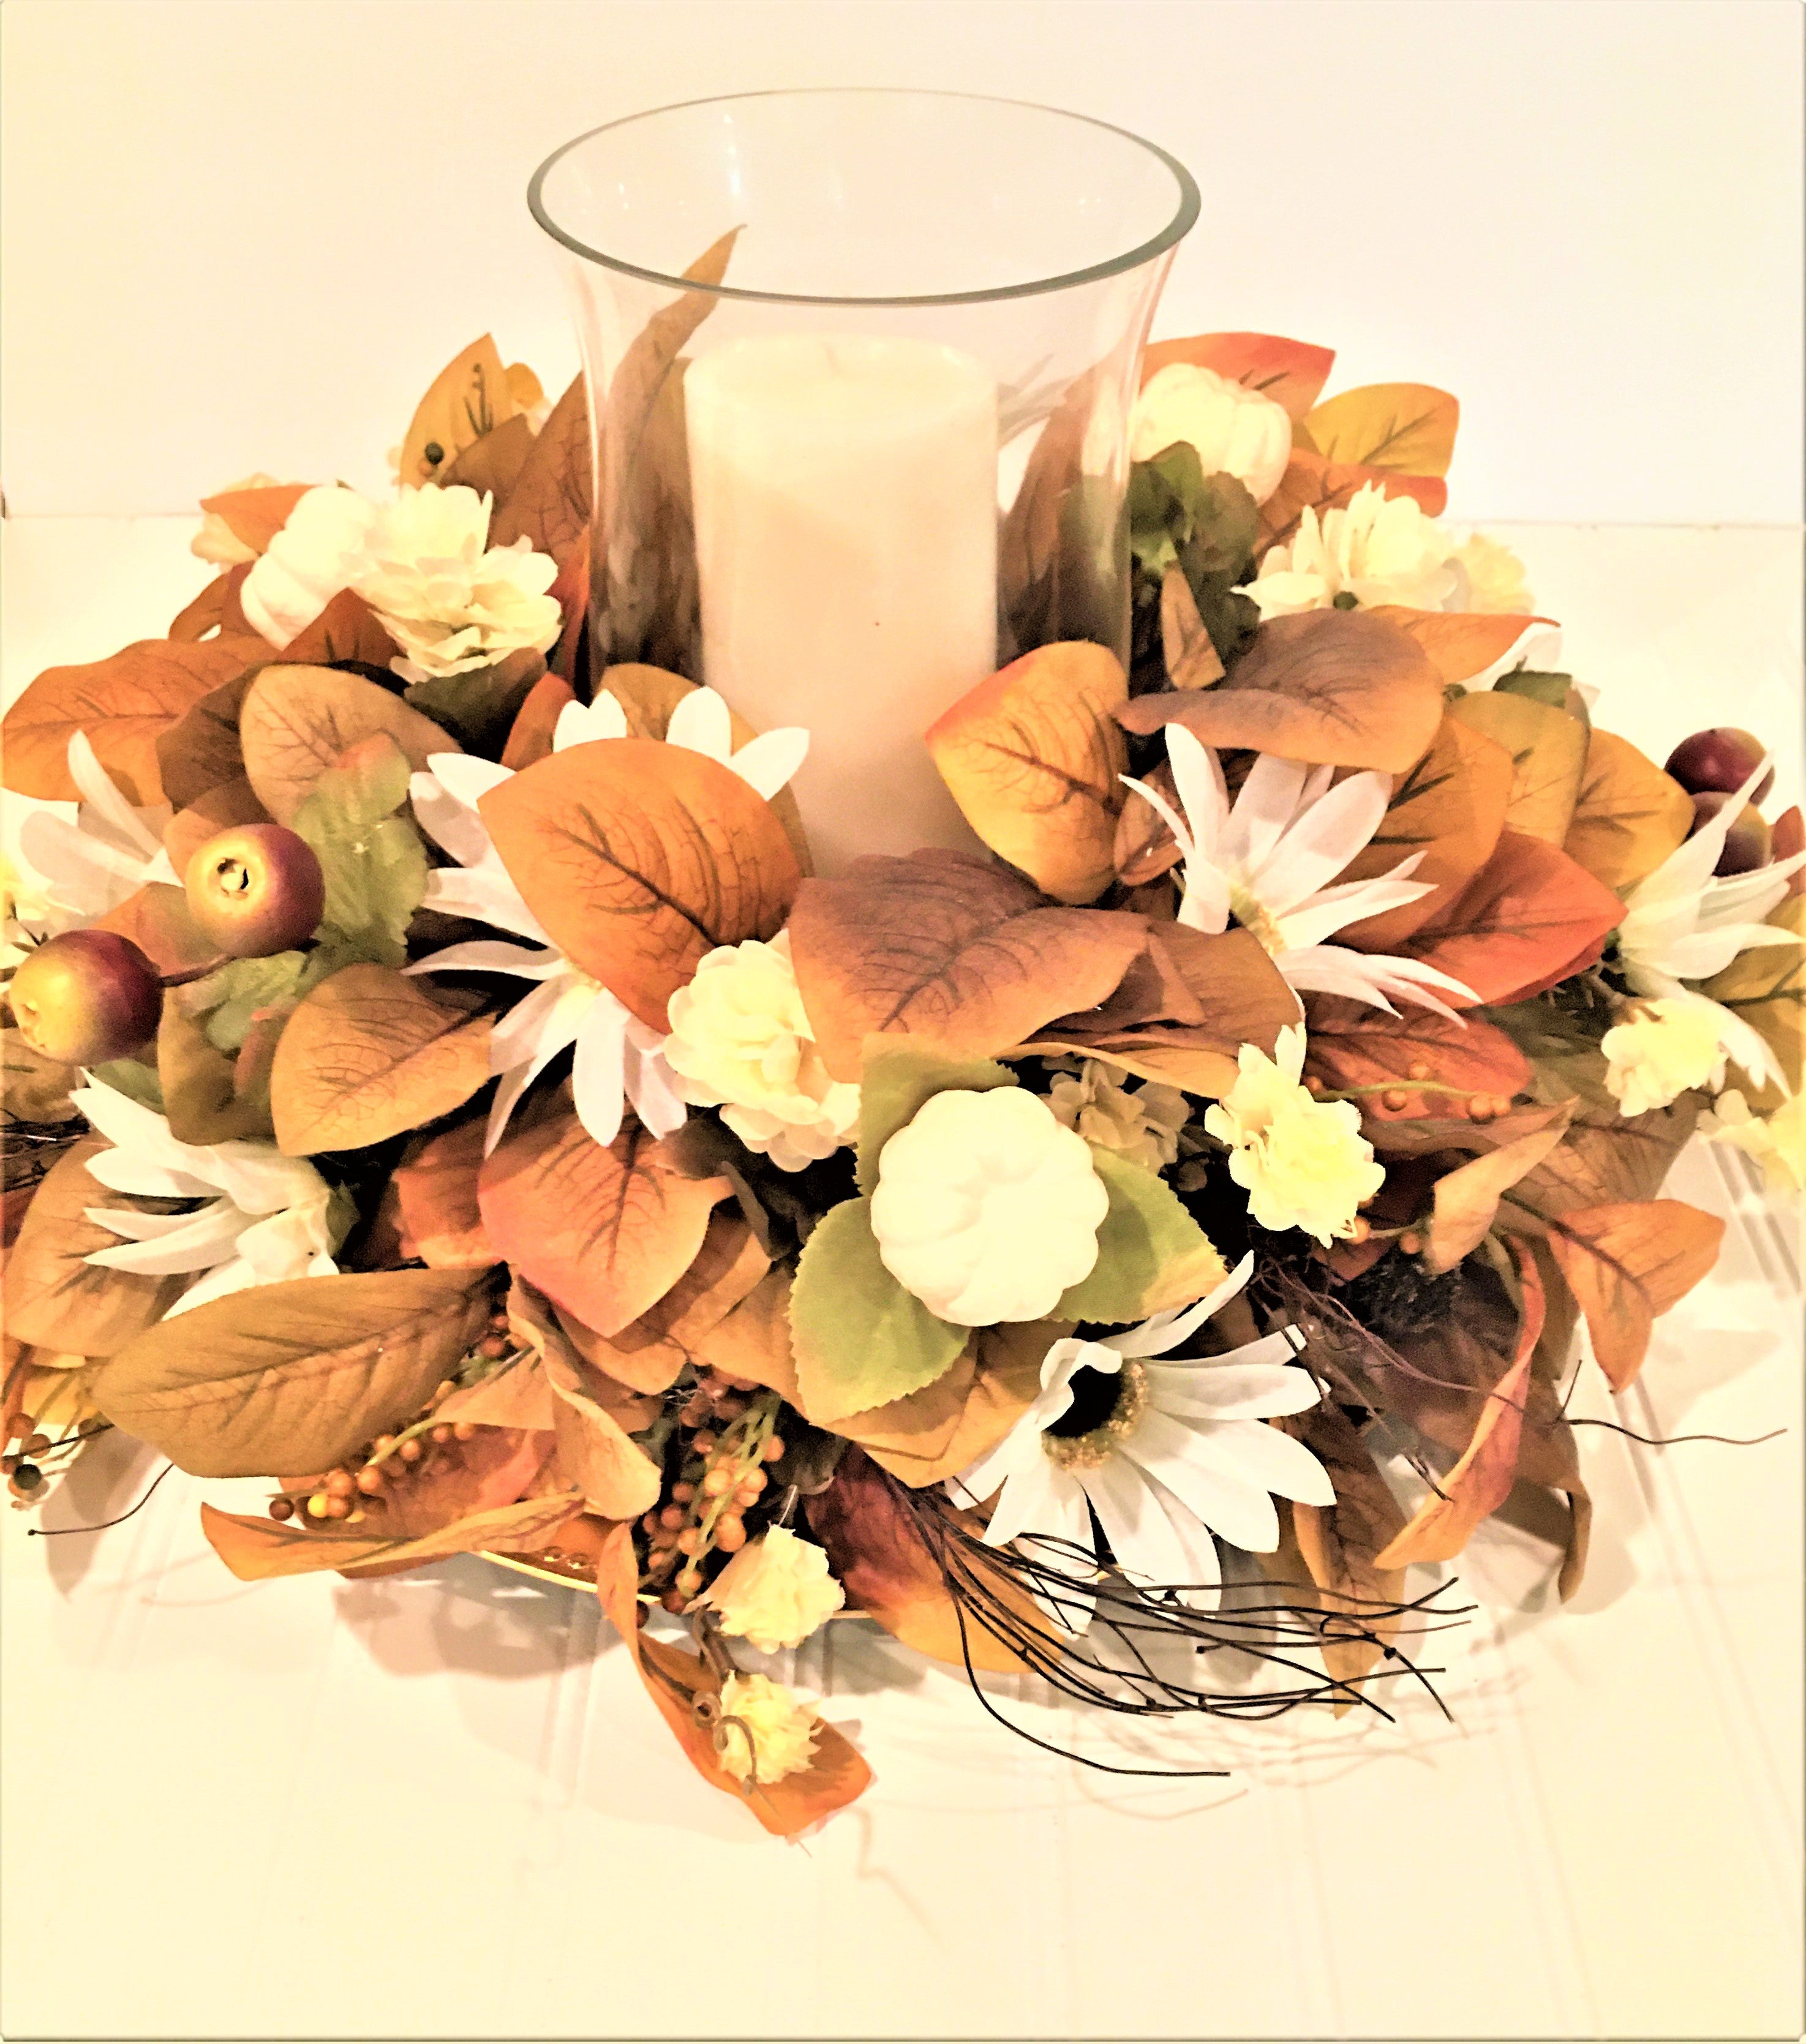 Classic Harvest Centerpiece Fall Classic Centerpiece 18" x10H with wide Glass Vase "